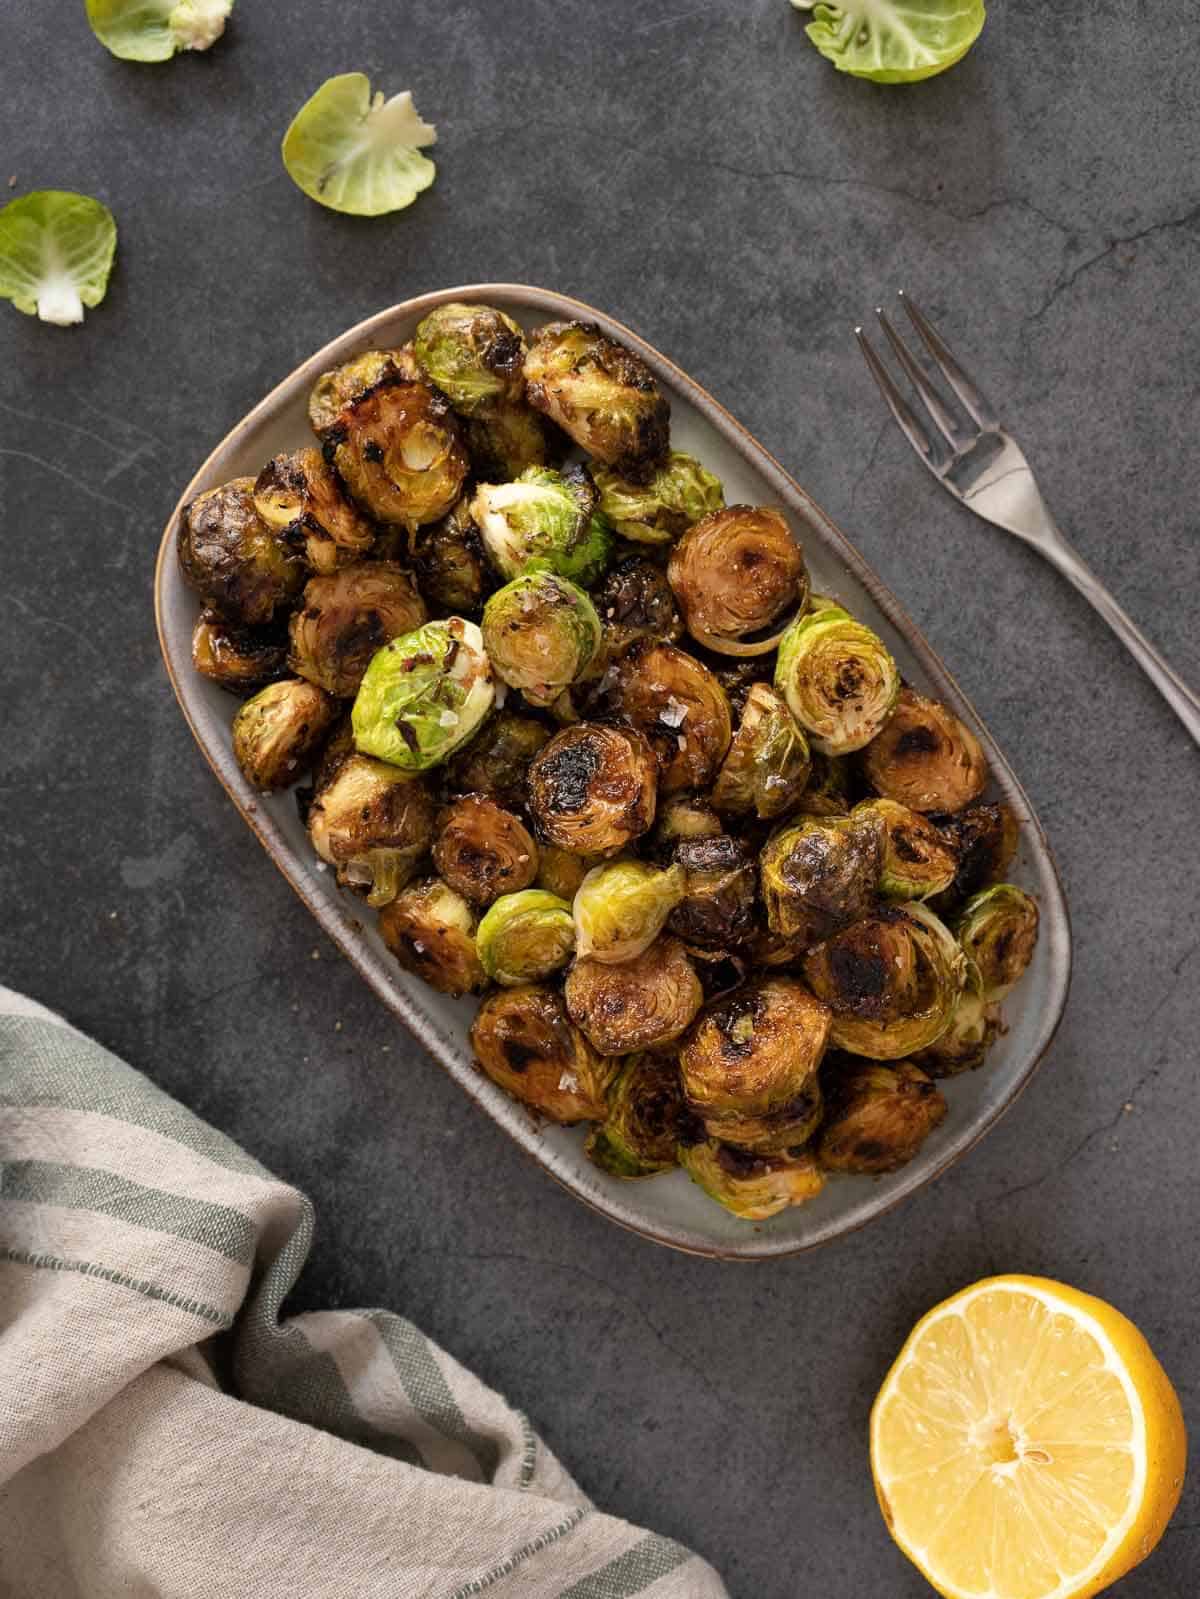 roasted balsamic lemon marinated Brussels sprouts plated with half a lemon by its side.